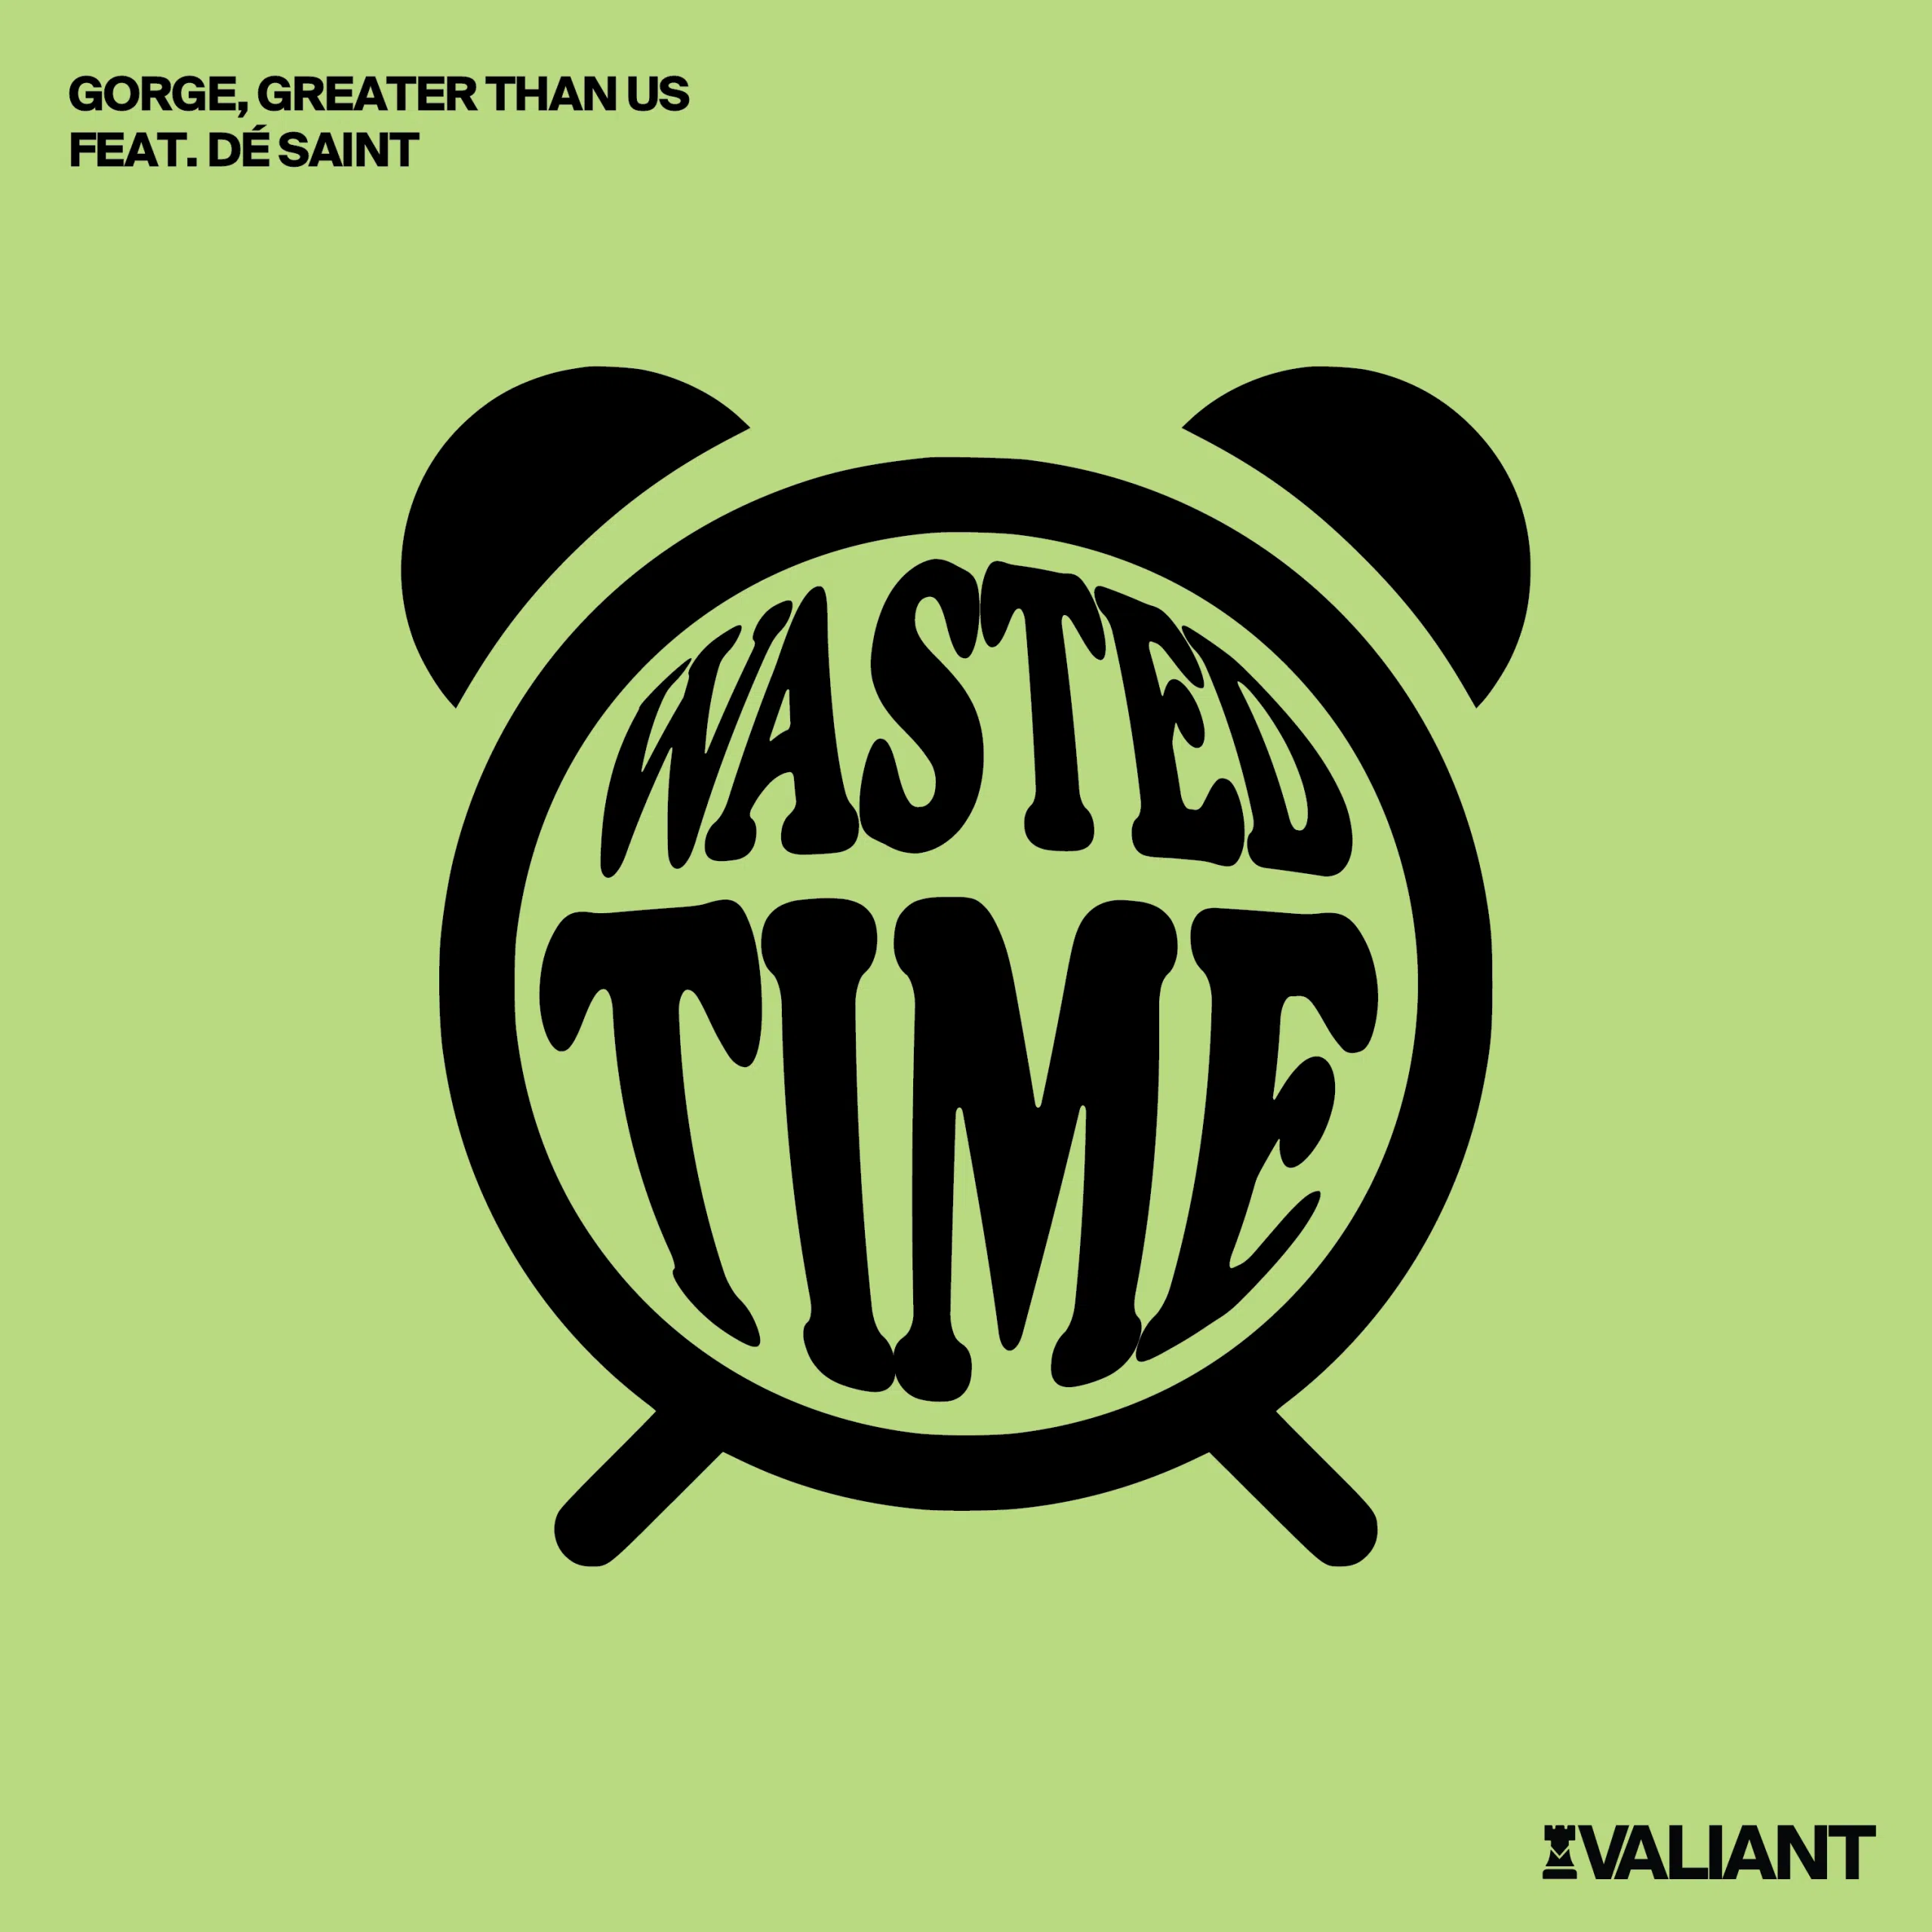 Gorge, Greater Than Us, De Saint “Wasted Time”